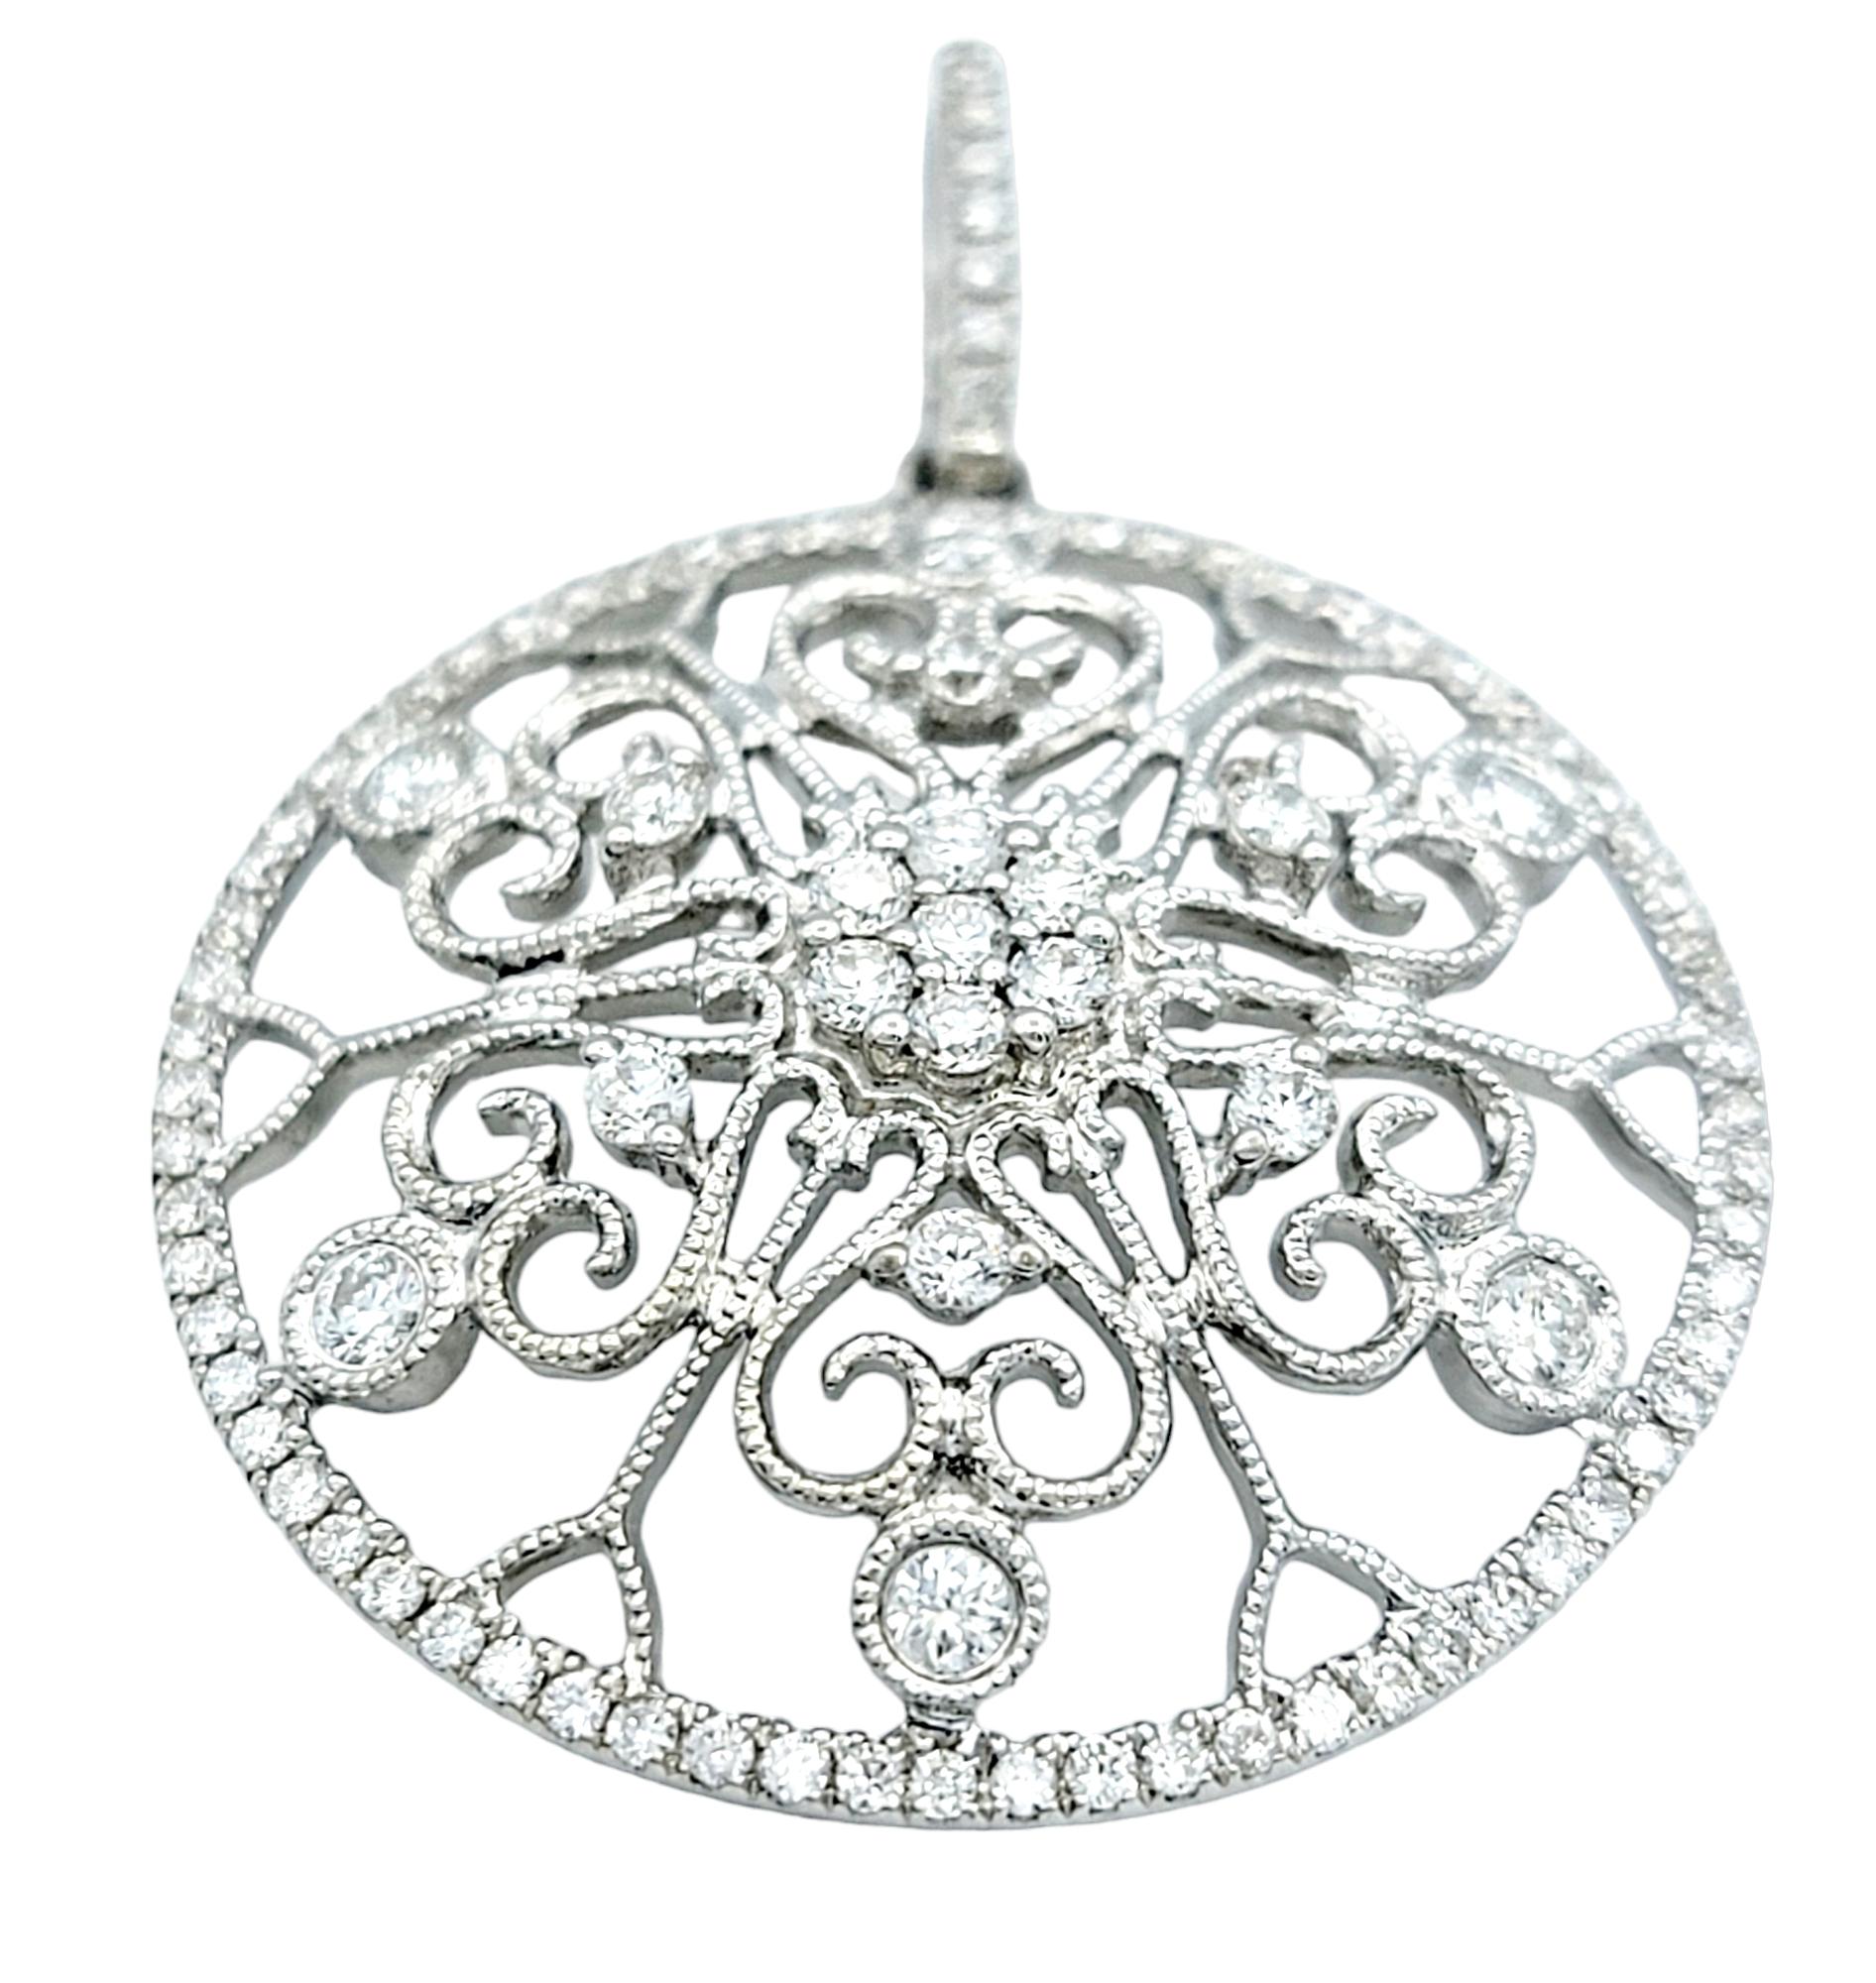 Radiating with timeless charm, this captivating diamond pendant is an embodiment of elegance and sophistication. Set in opulent 14 karat white gold, the pendant takes the form of a resplendent circle adorned with an intricate scroll-like design.